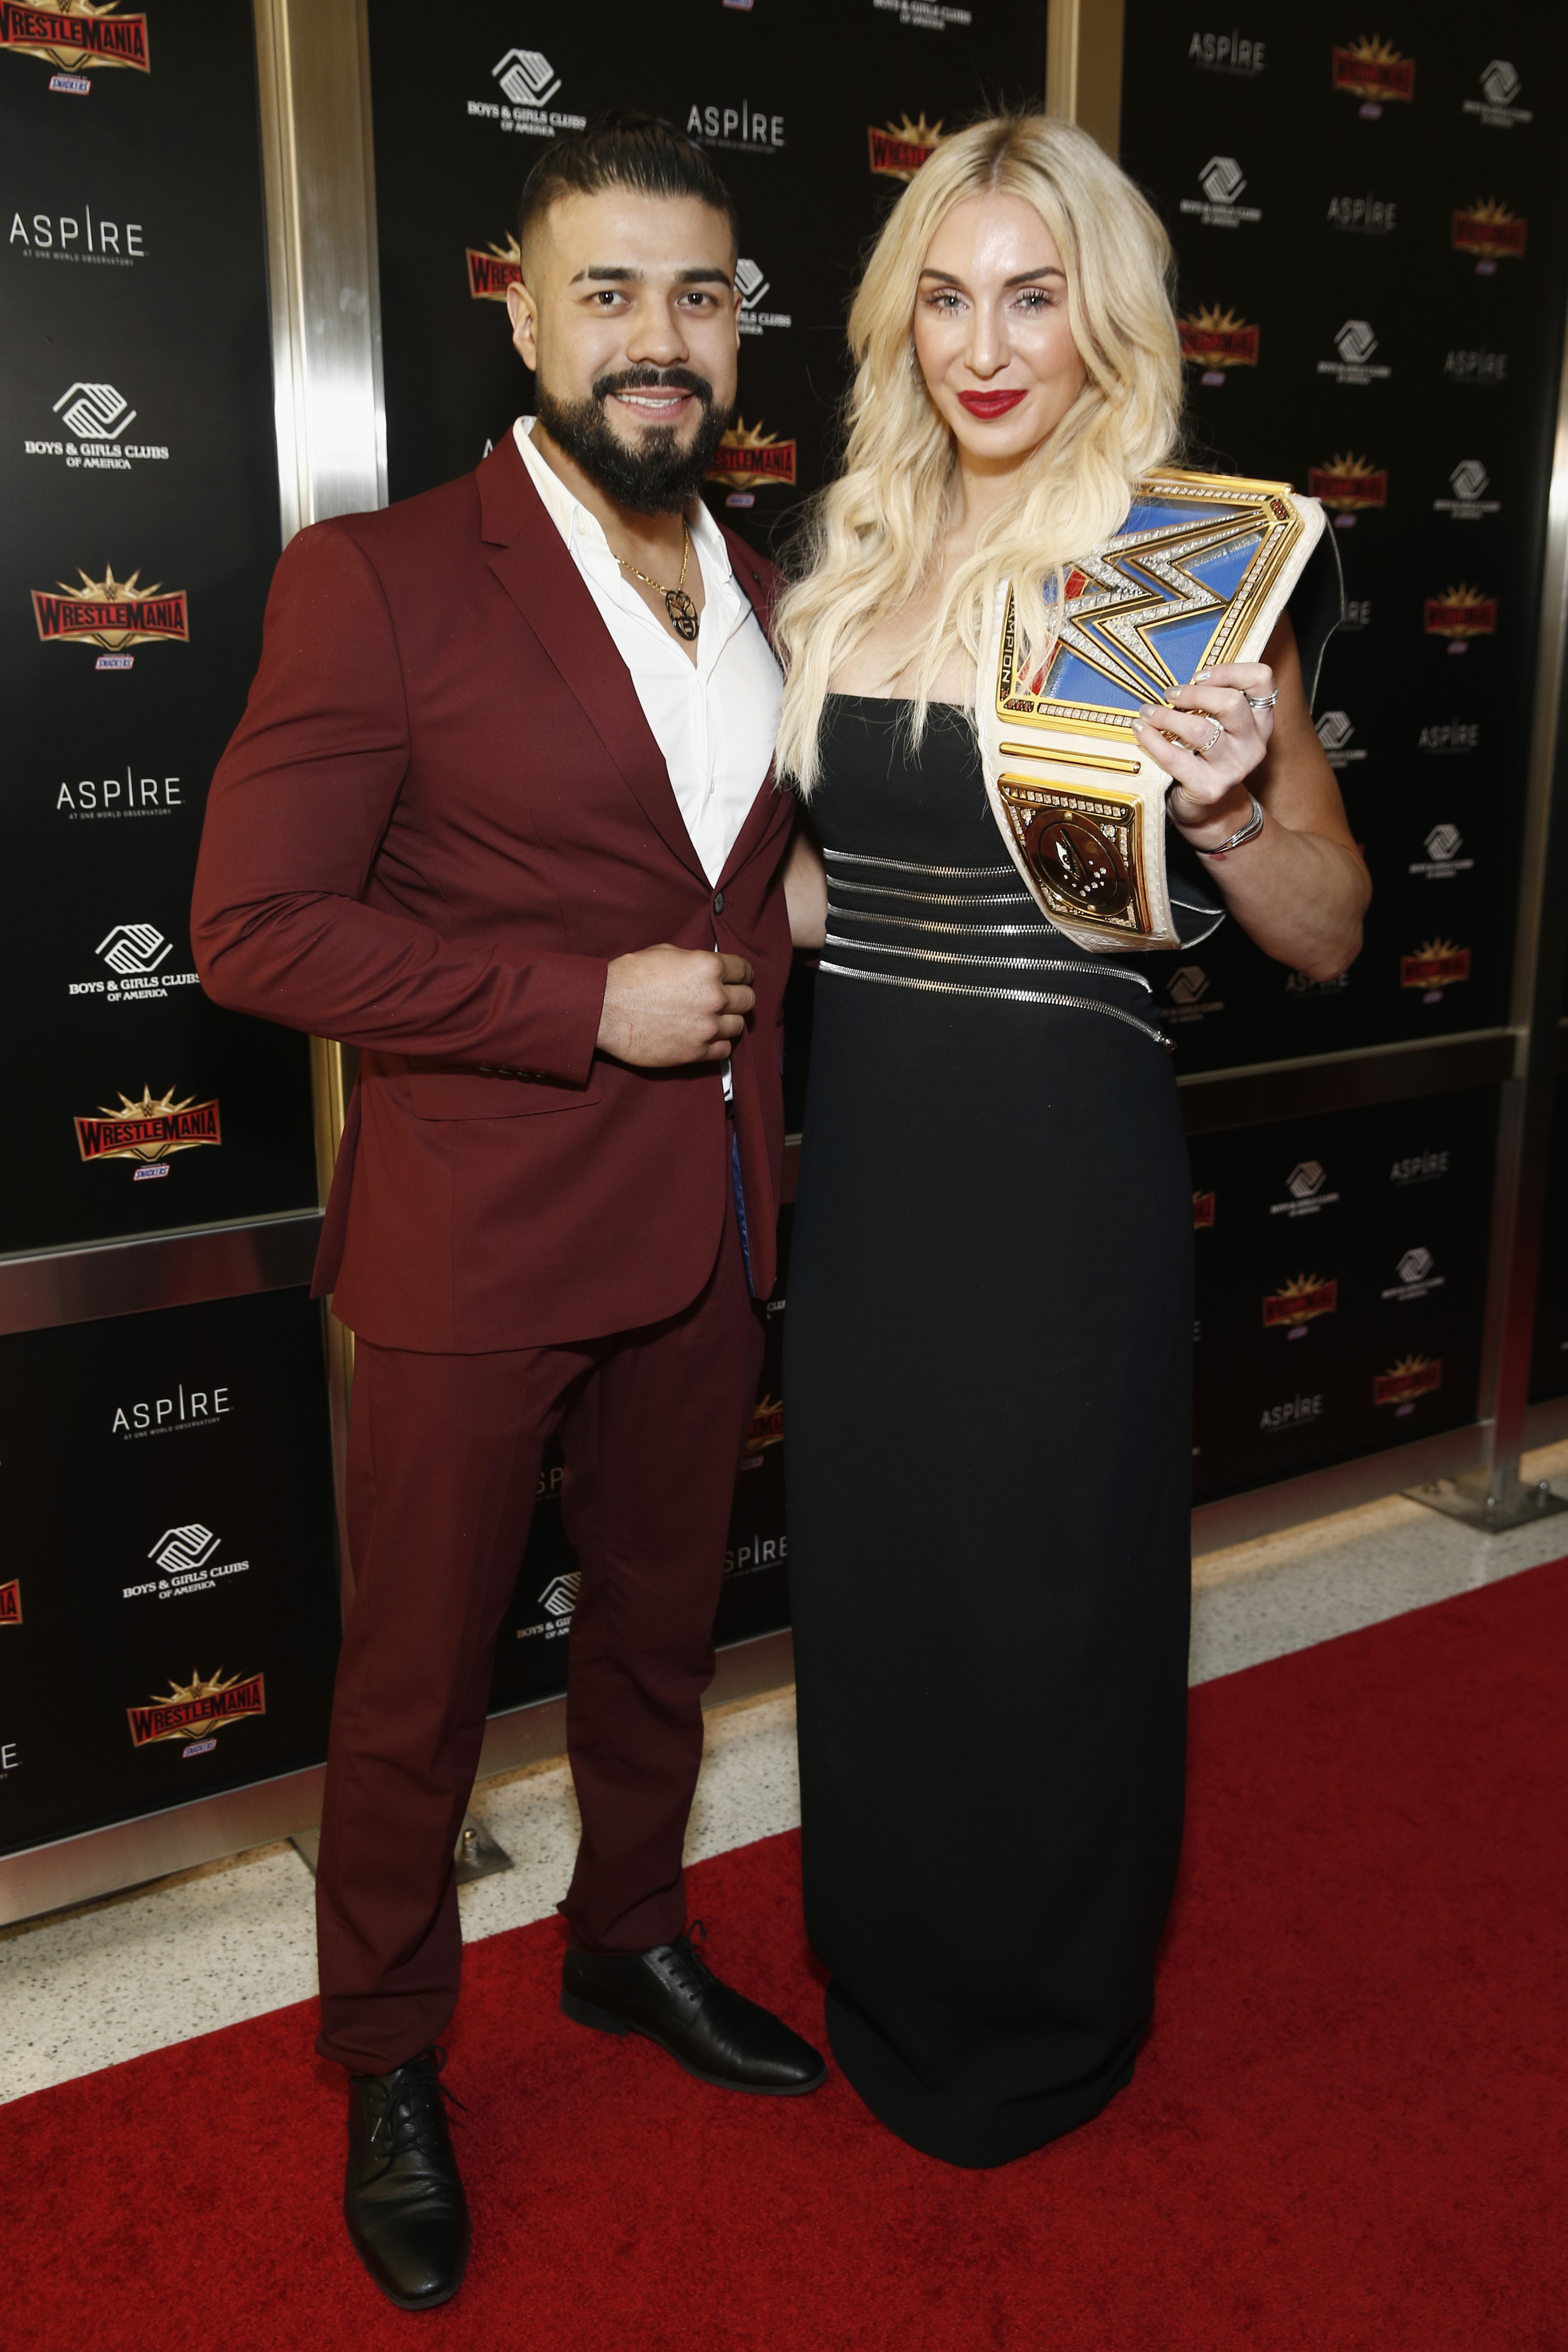 WWE stars Andrade "Cien" Almas and Charlotte Flair attend the 2019 Hall of Fame ceremony.